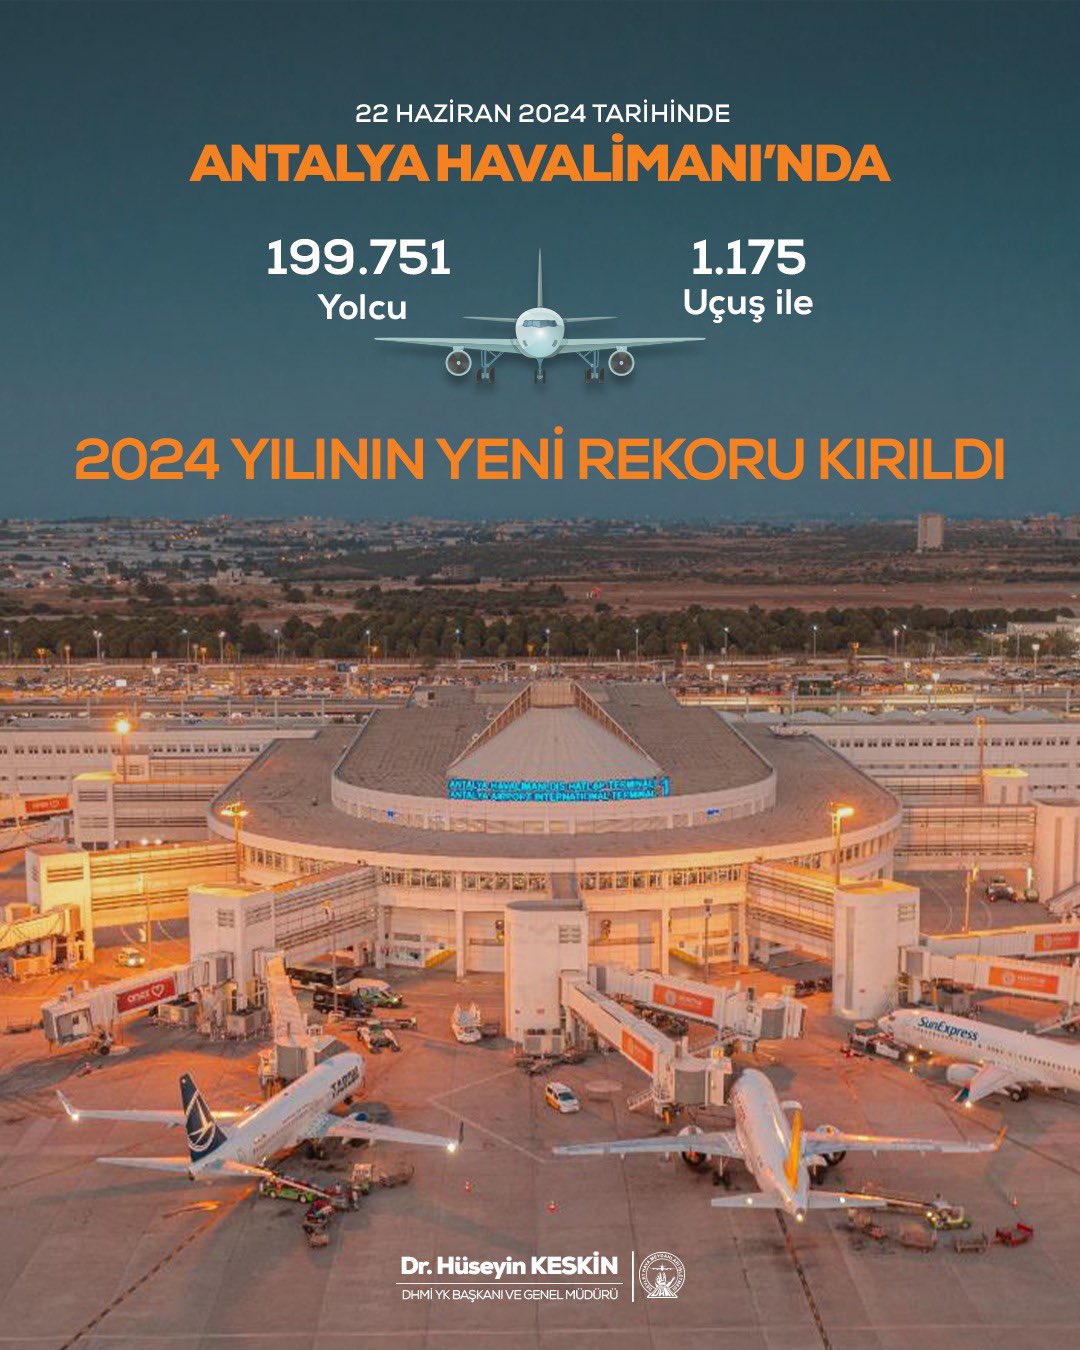 Antalya Airport Sets New Records in Air Traffic and Passenger Numbers 30 Haziran 2024